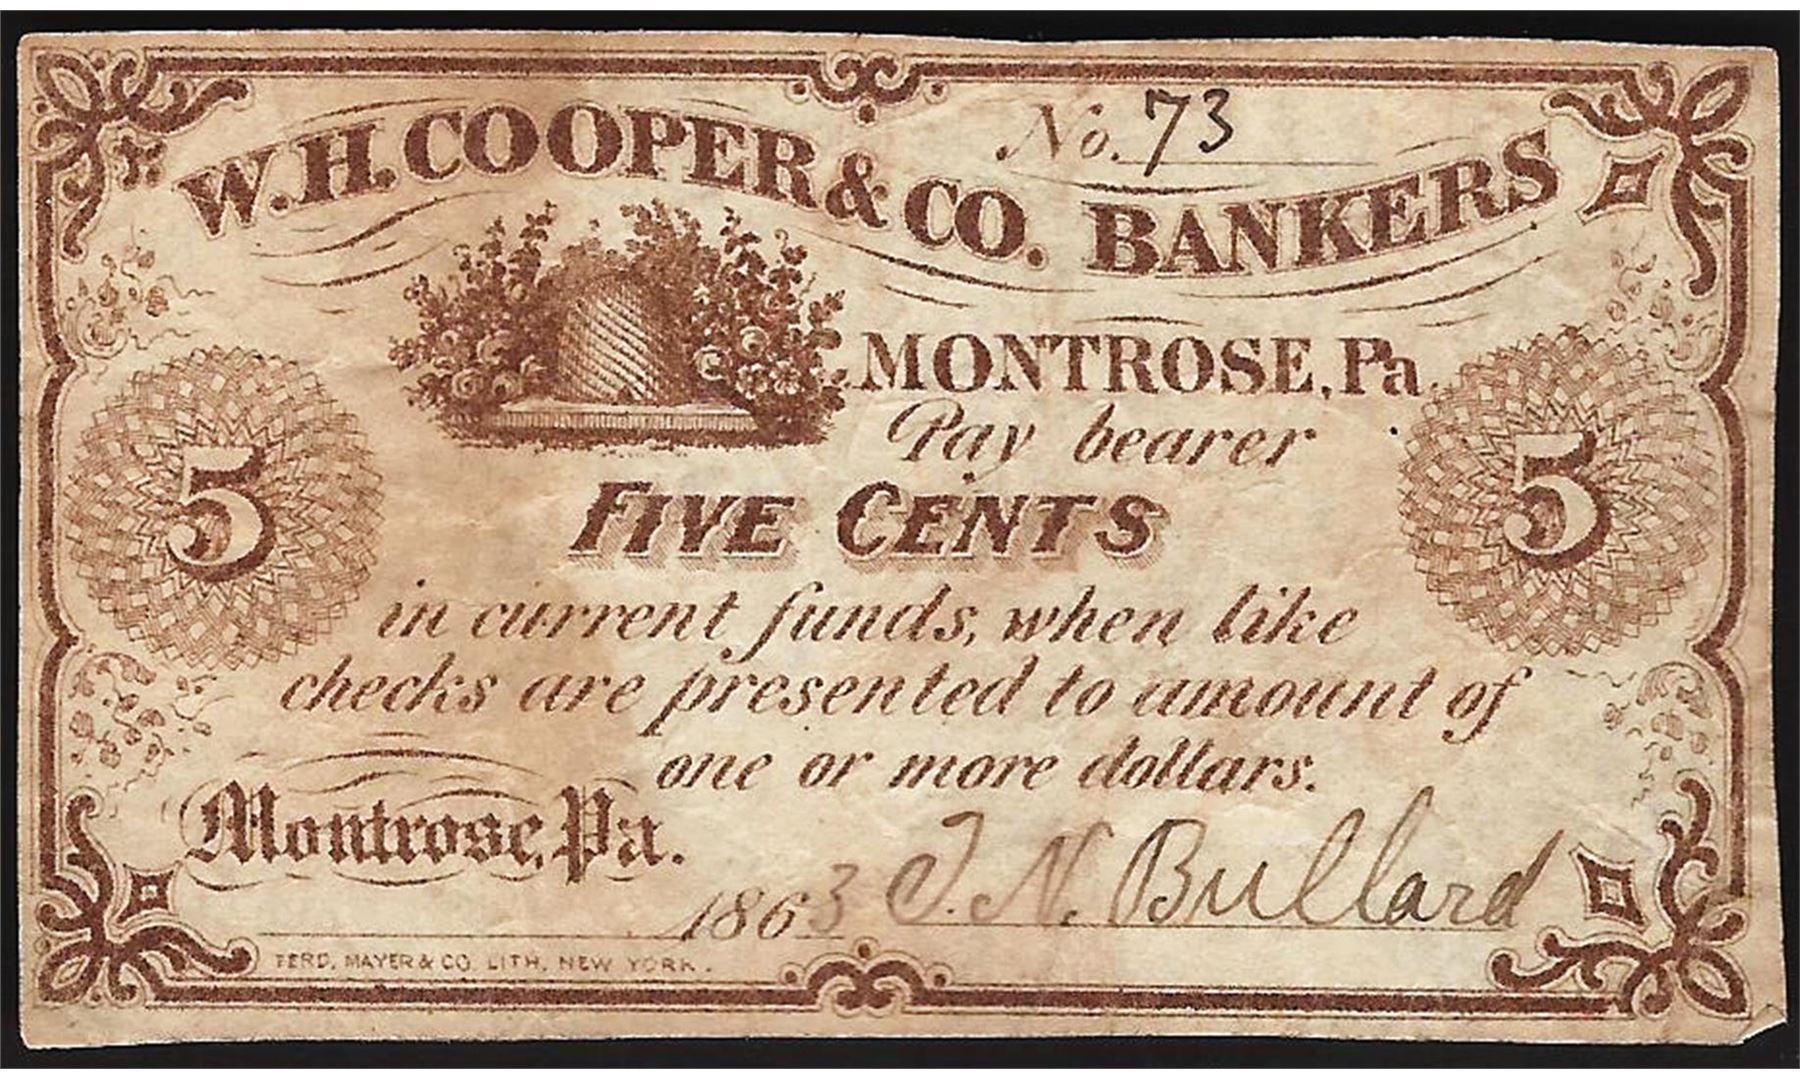 obs_PA_1863_5cents_WHCooper-Bankers_face.jpg